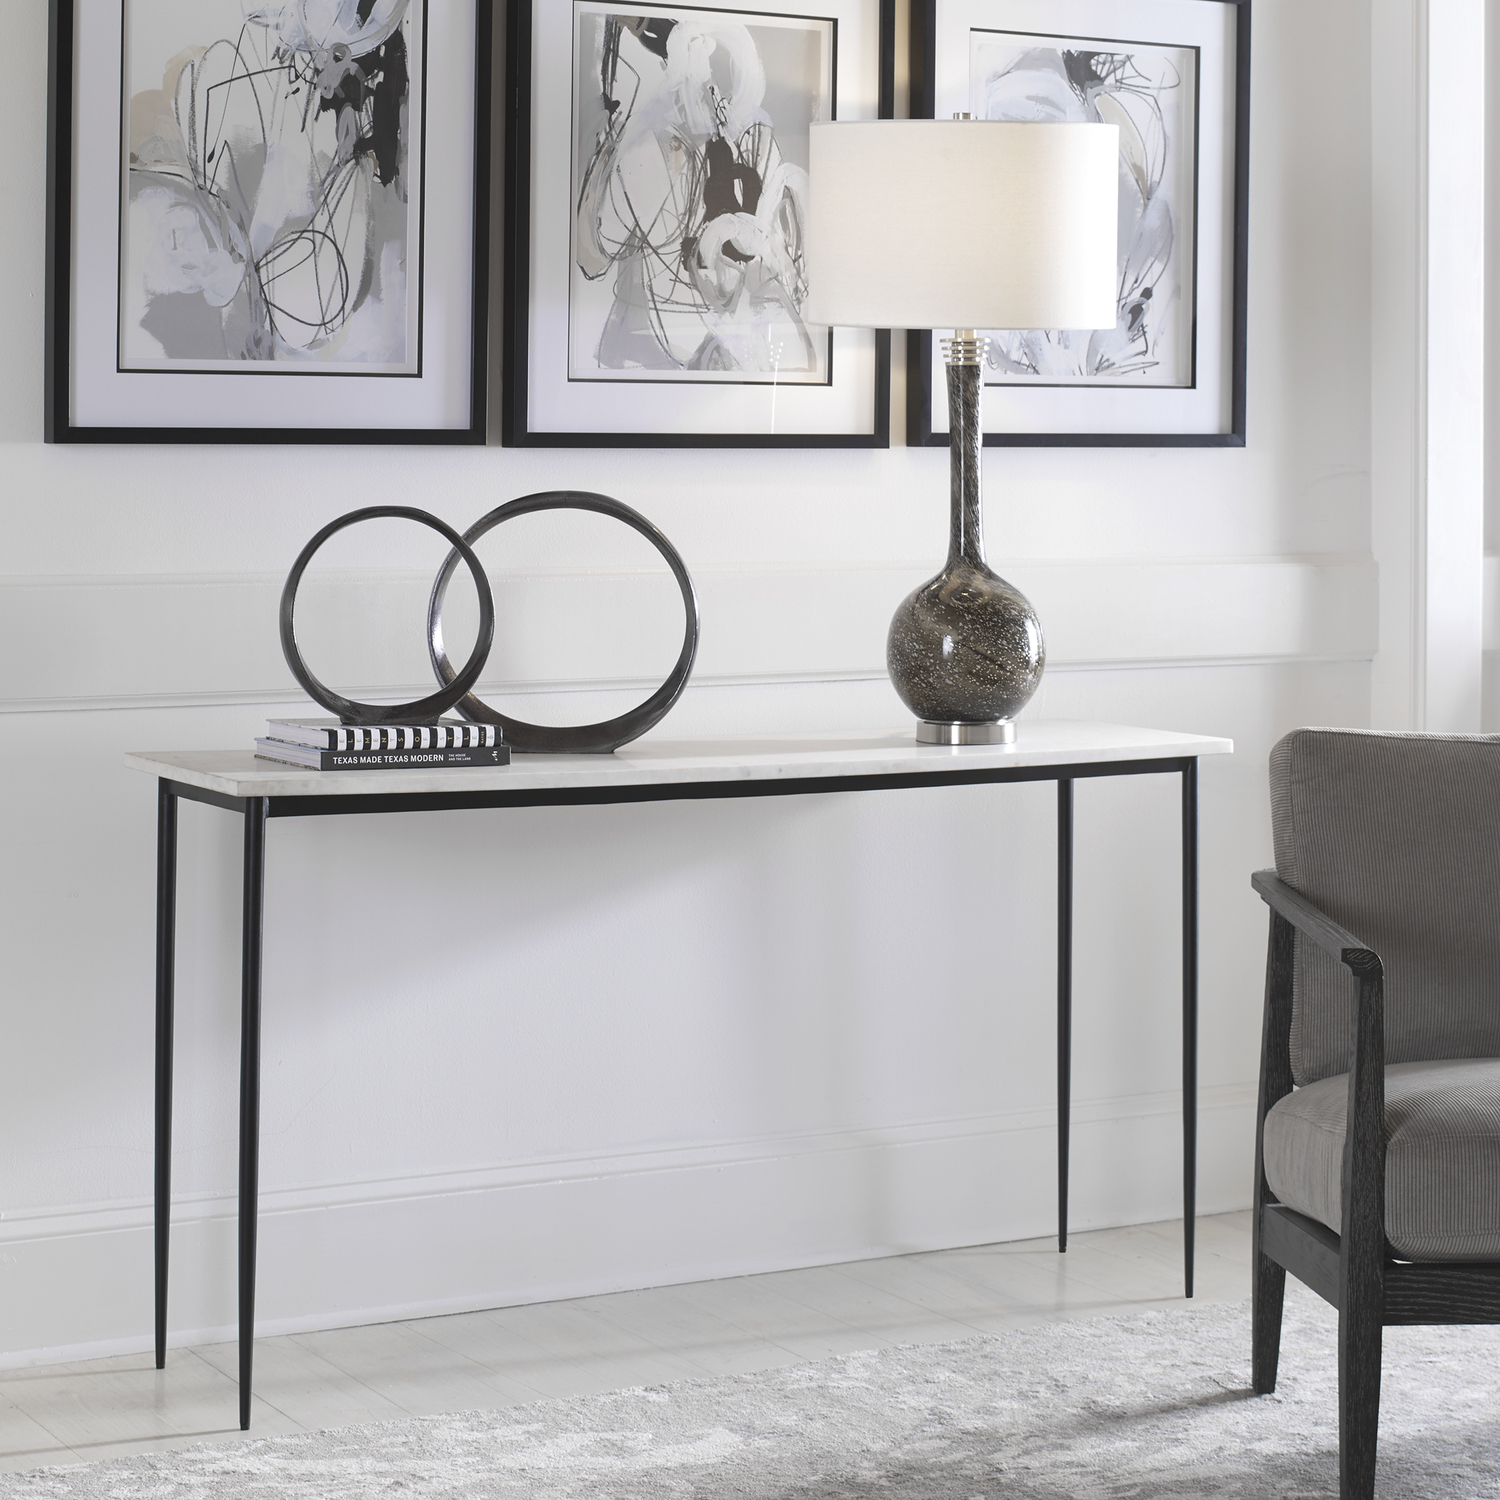 cheap black coffee table Uttermost Console Table This Modern Console Showcases An Impressive White Marble Top On A Cast Iron Base With Slender Tapered Legs In Satin Black. Because Of The Natural Characteristics Of Marble, Each Piece Will Have Unique Veining Patterns.